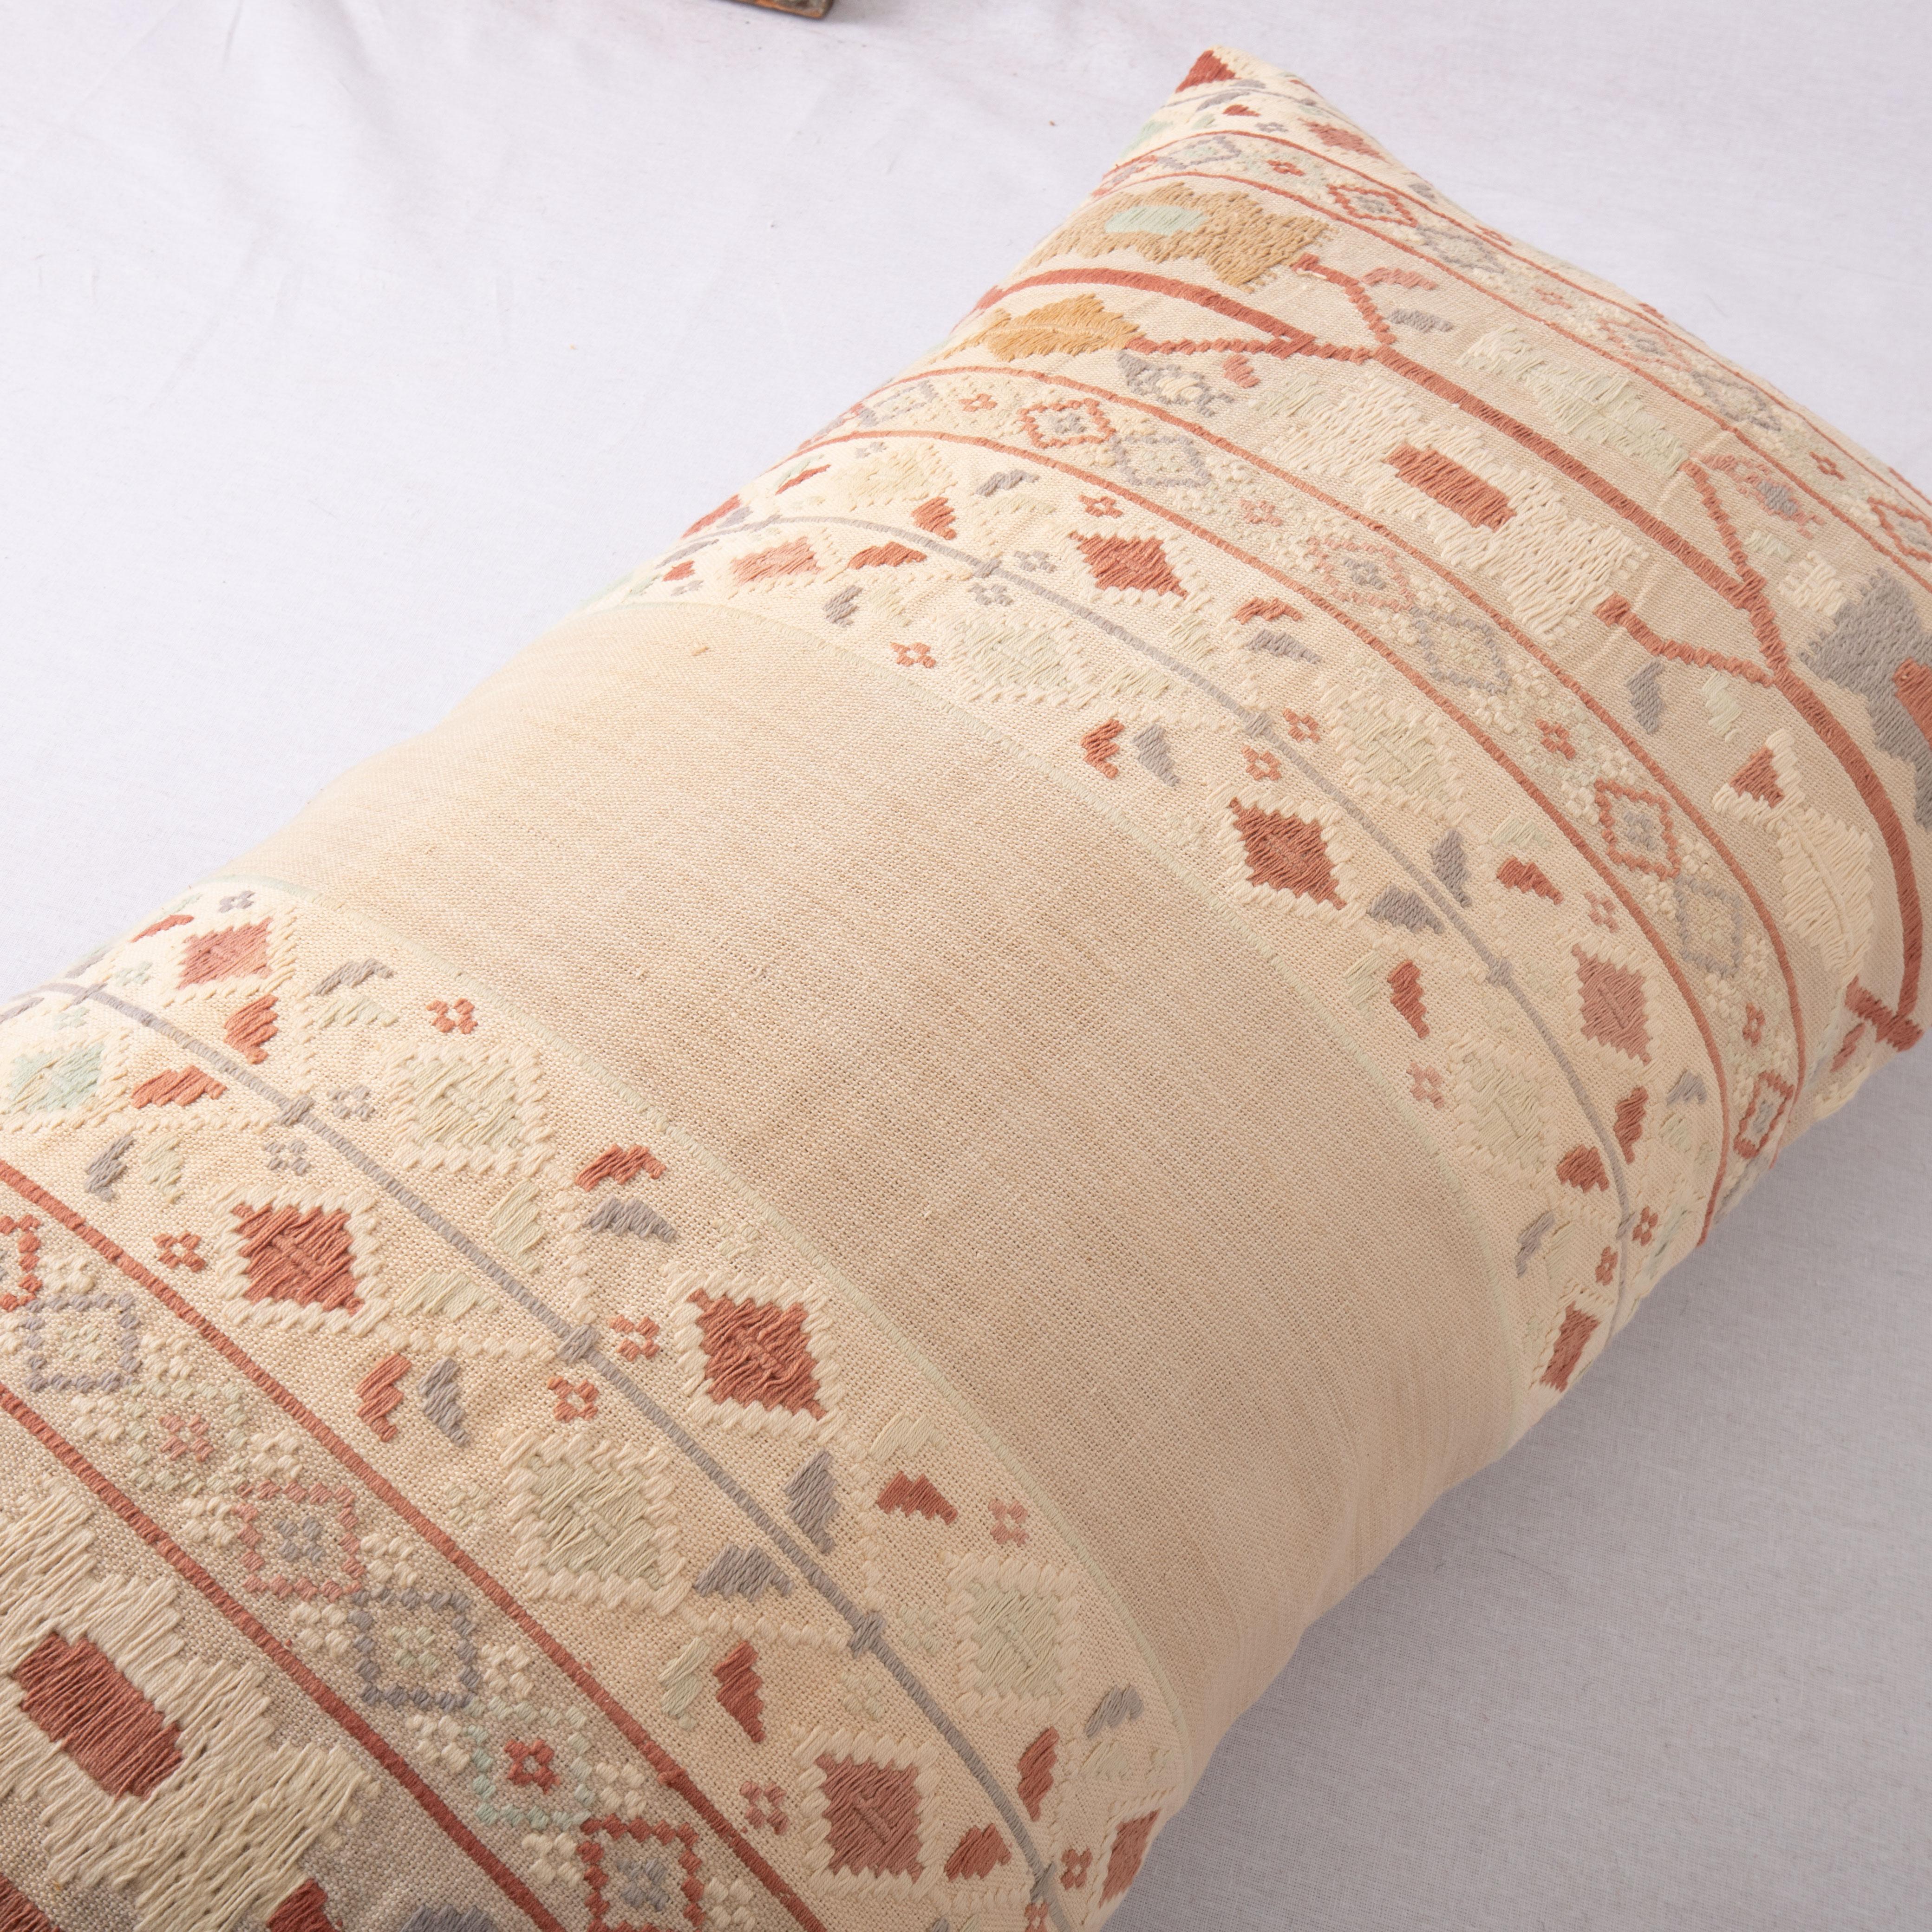 Woven Pillow Cover Made from a Vintage East European Linen and Cotton Textile For Sale